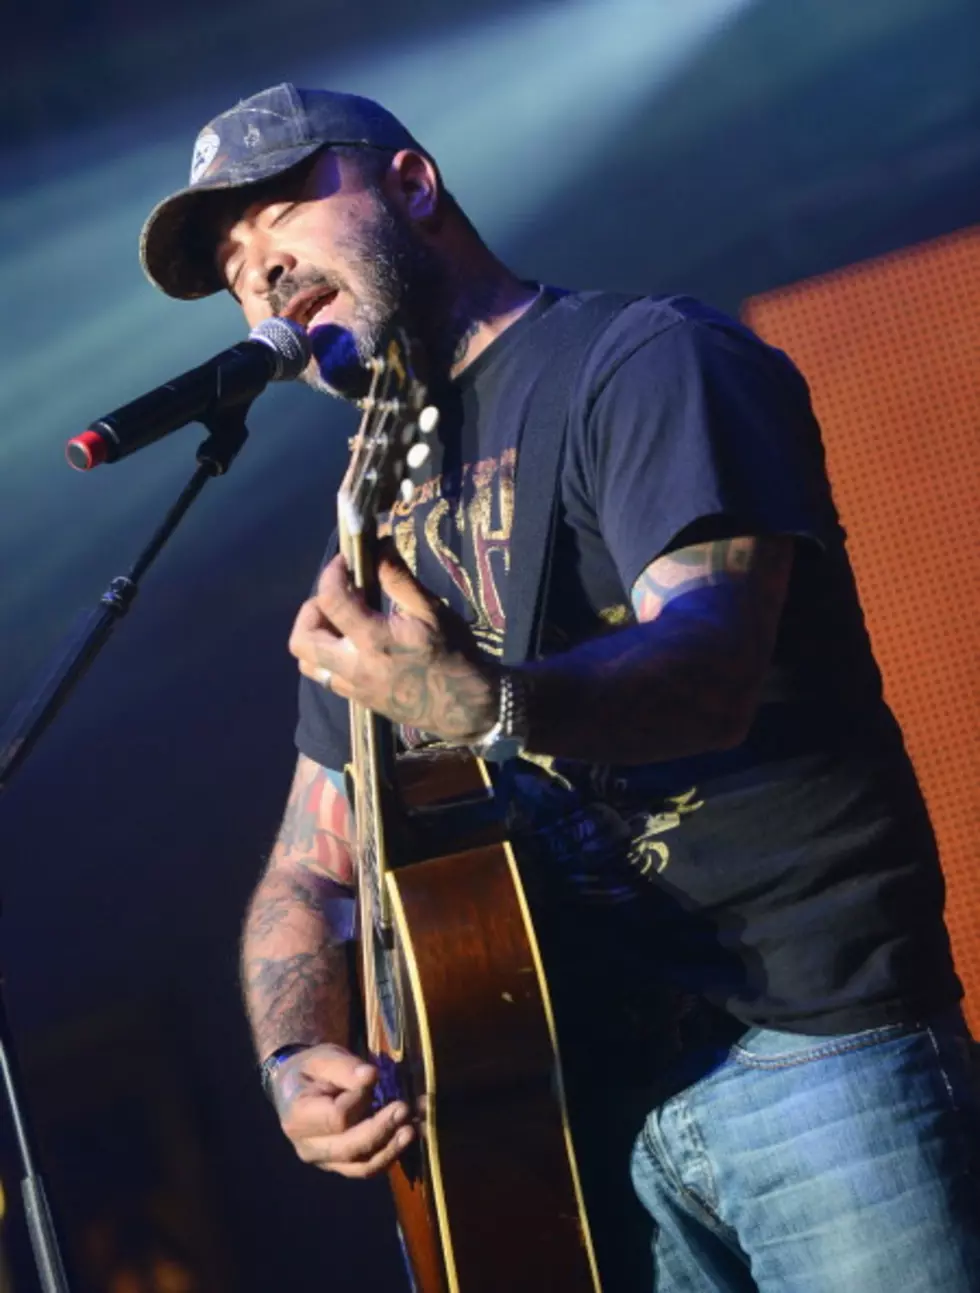 Aaron Lewis Set to Take on Thompson Square on Today’s Daily Duel [AUDIO/POLL]